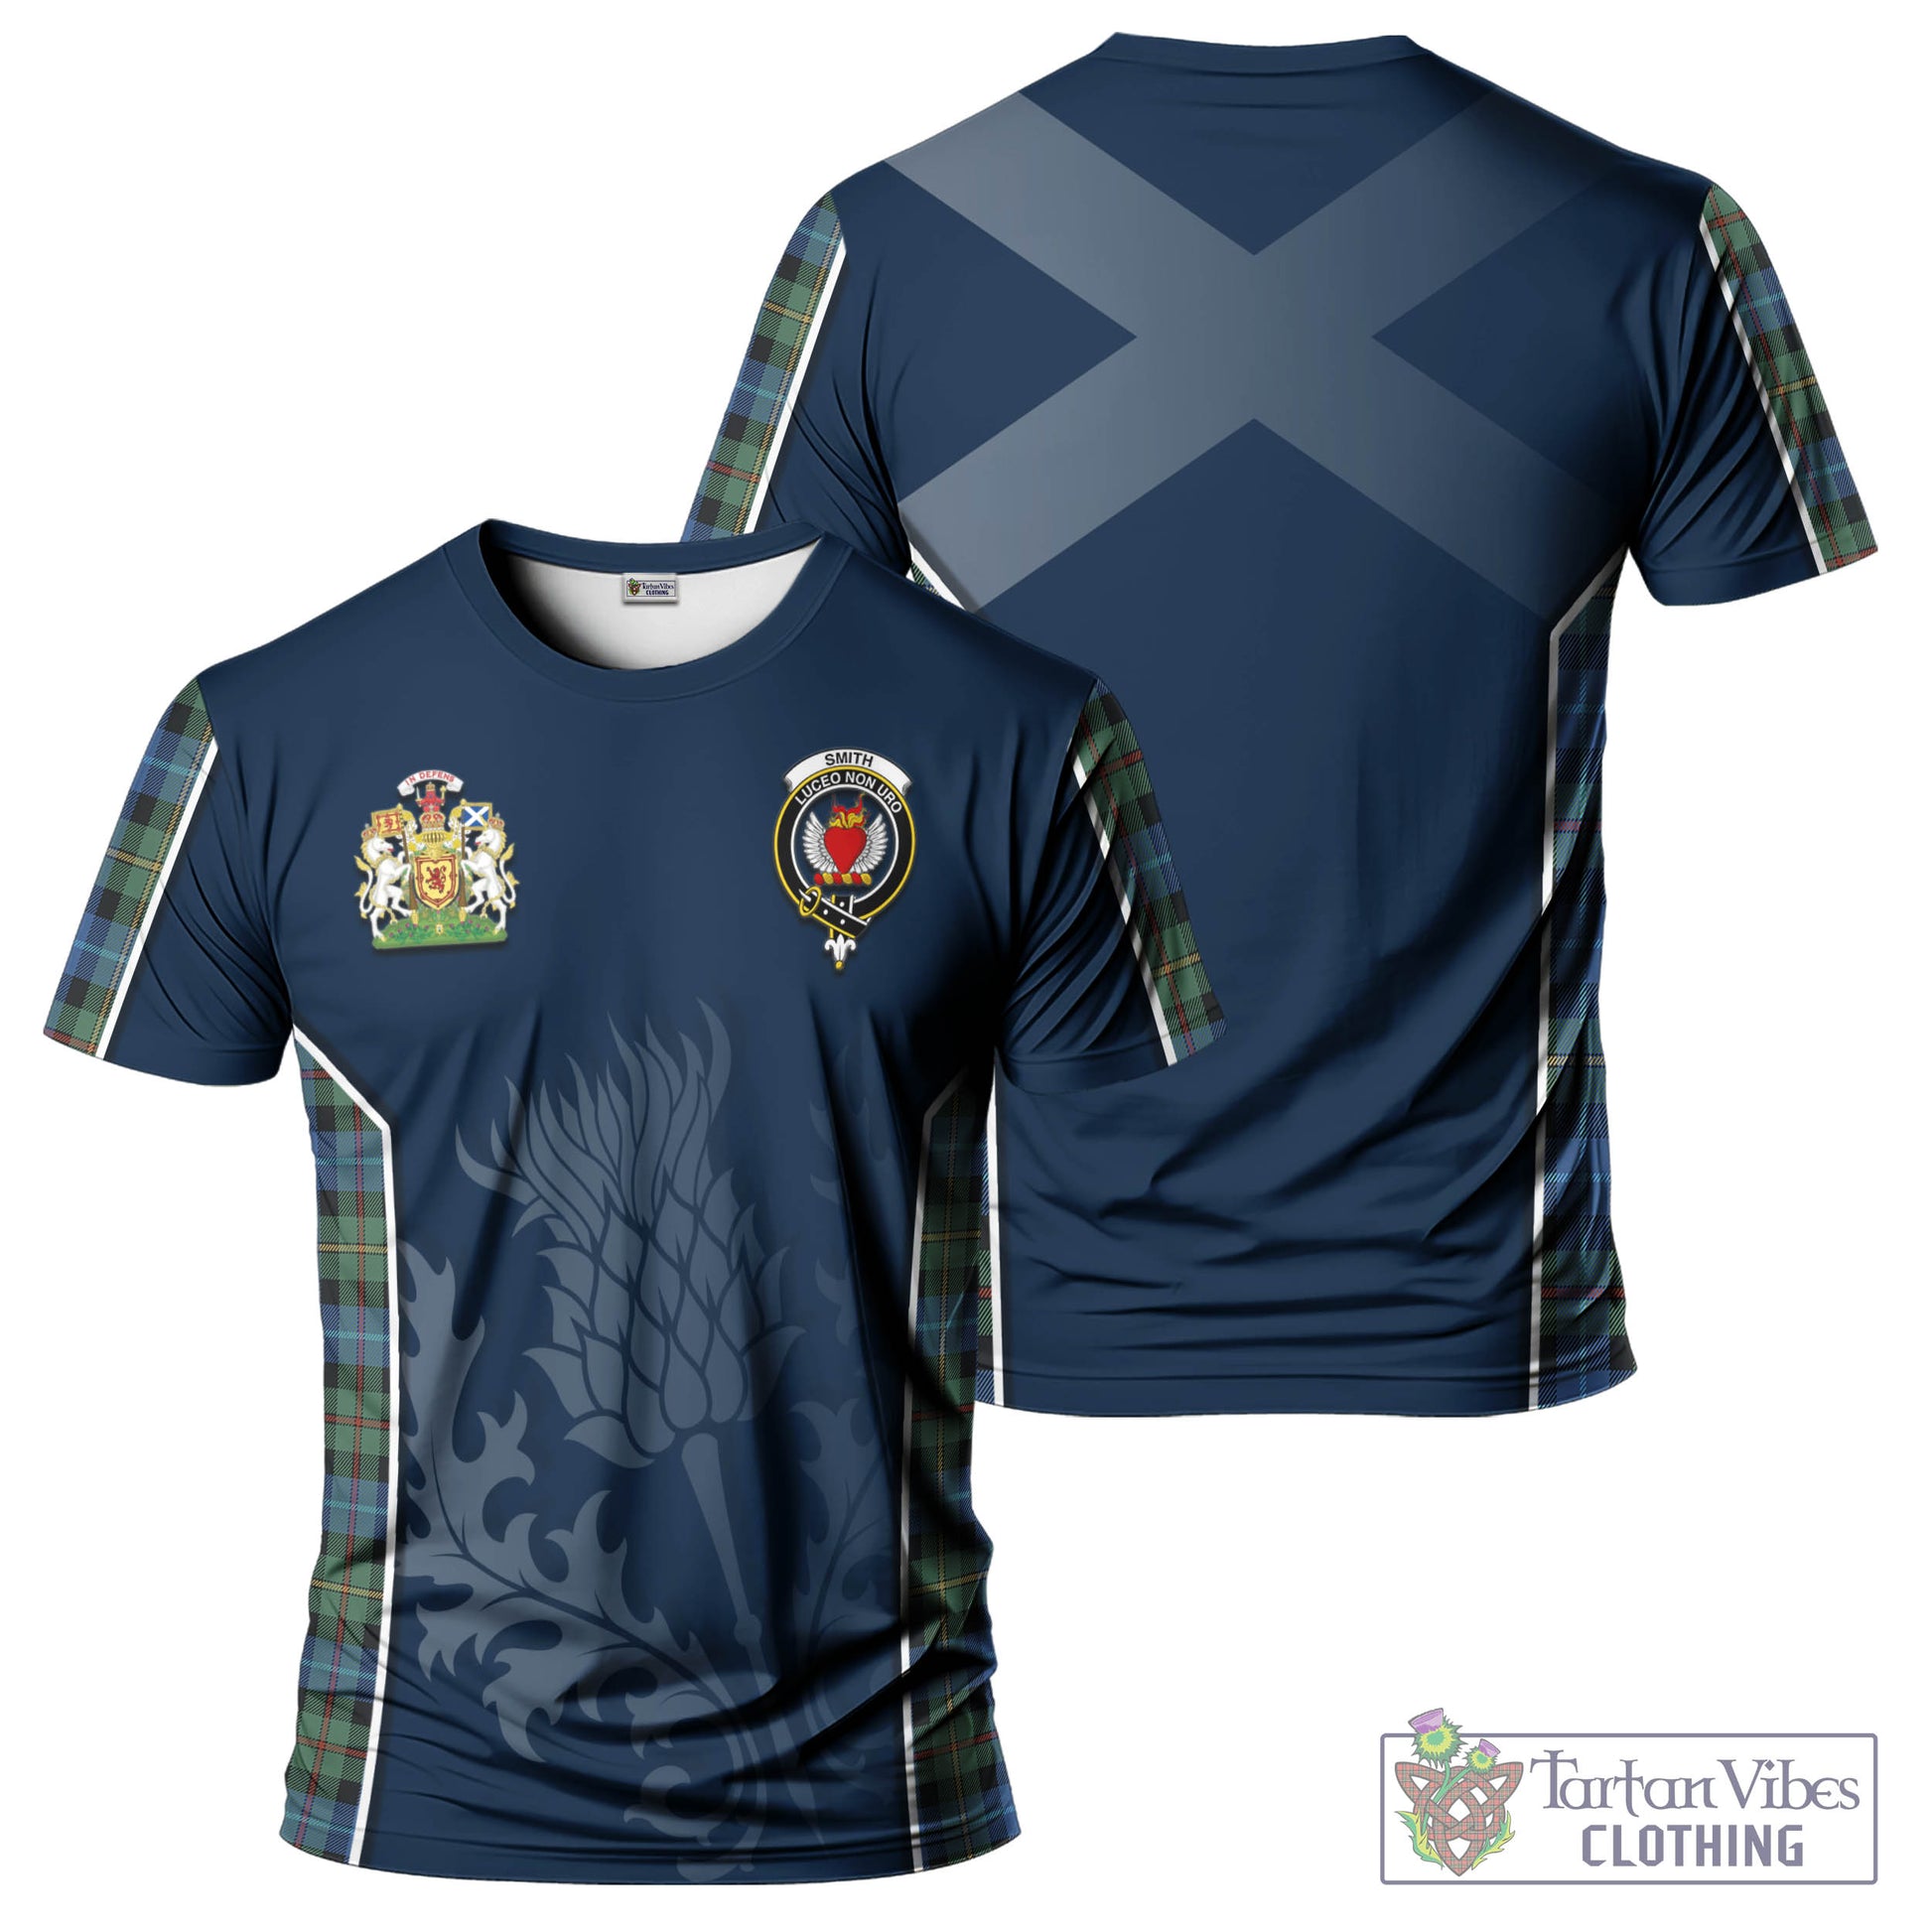 Tartan Vibes Clothing Smith Ancient Tartan T-Shirt with Family Crest and Scottish Thistle Vibes Sport Style